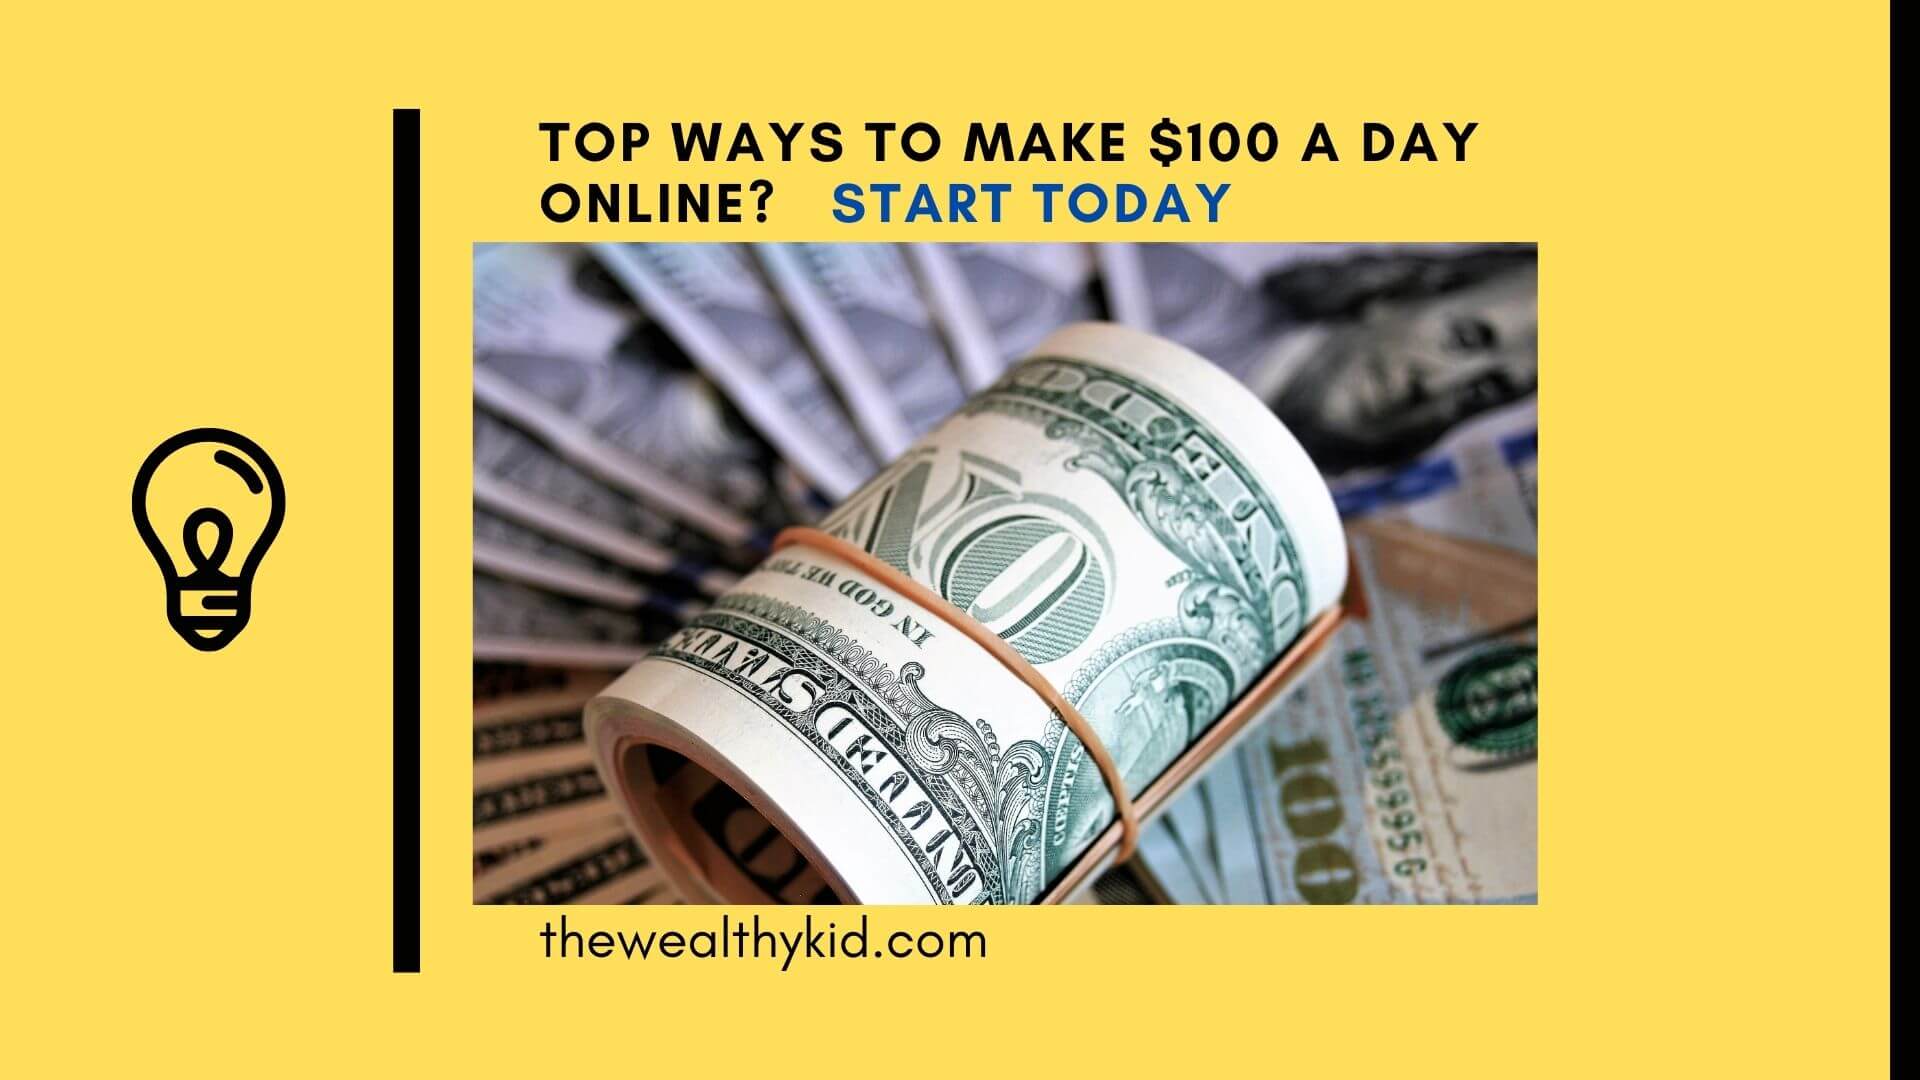 How Can I Make 100 Dollars A Day Online?